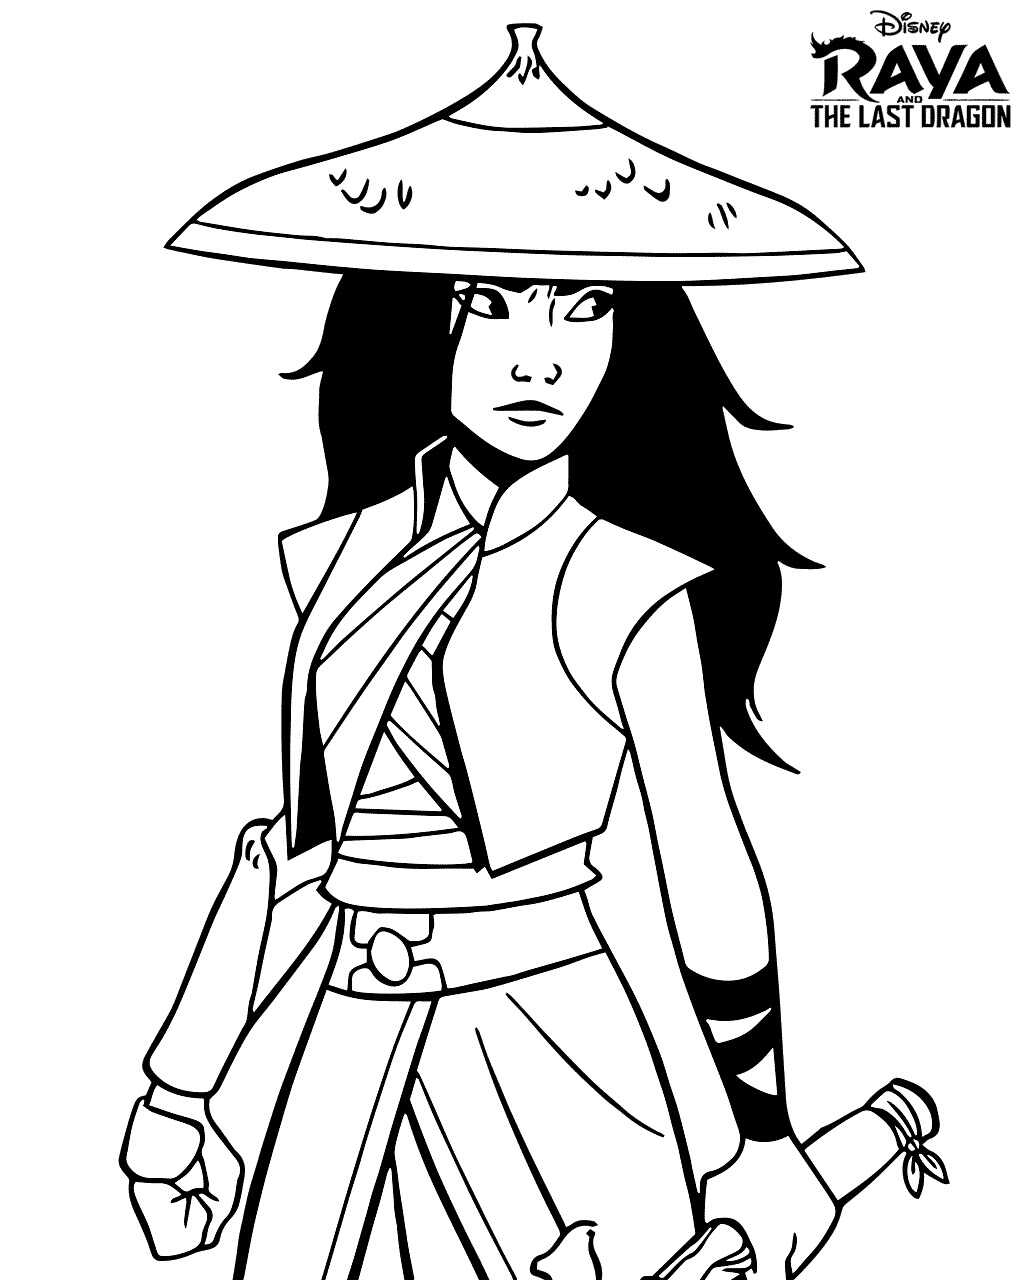 Princess Raya Wears Hat And Holds Her Sword Coloring Pages